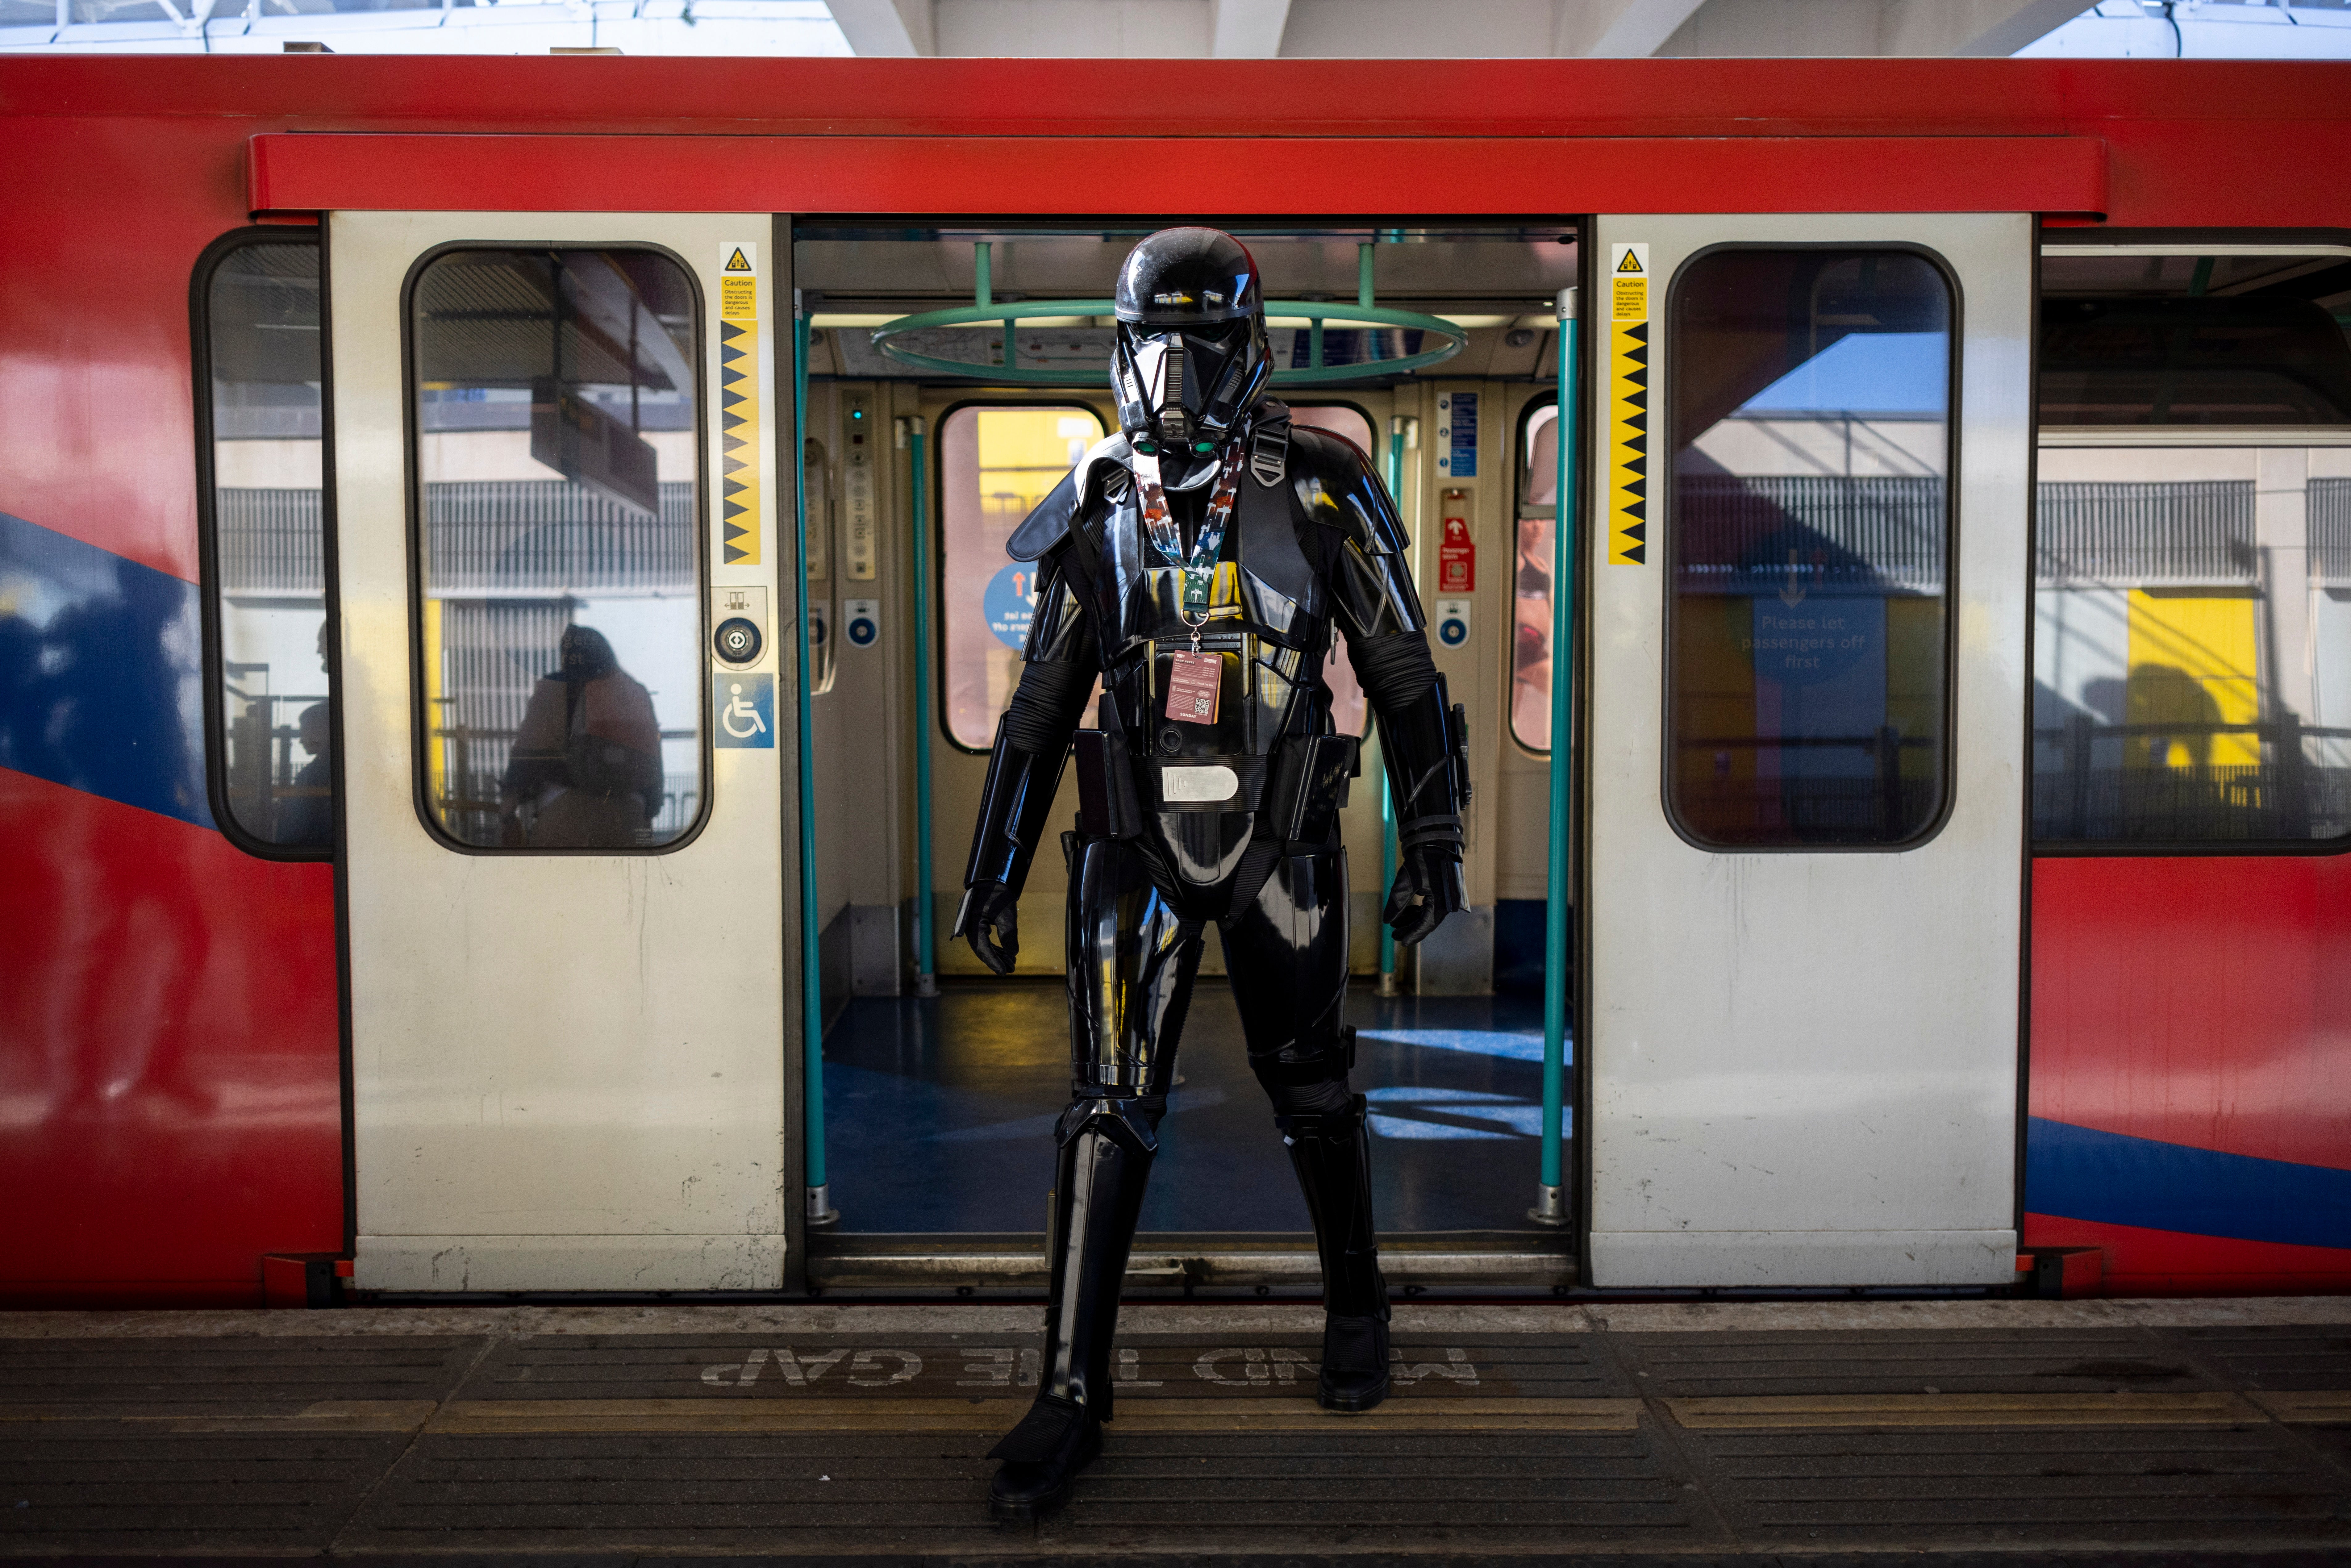 A Star Wars fan dressed as an Imperial Death Trooper arrives at ExCeL convention centre to attend Star Wars Celebration event in London